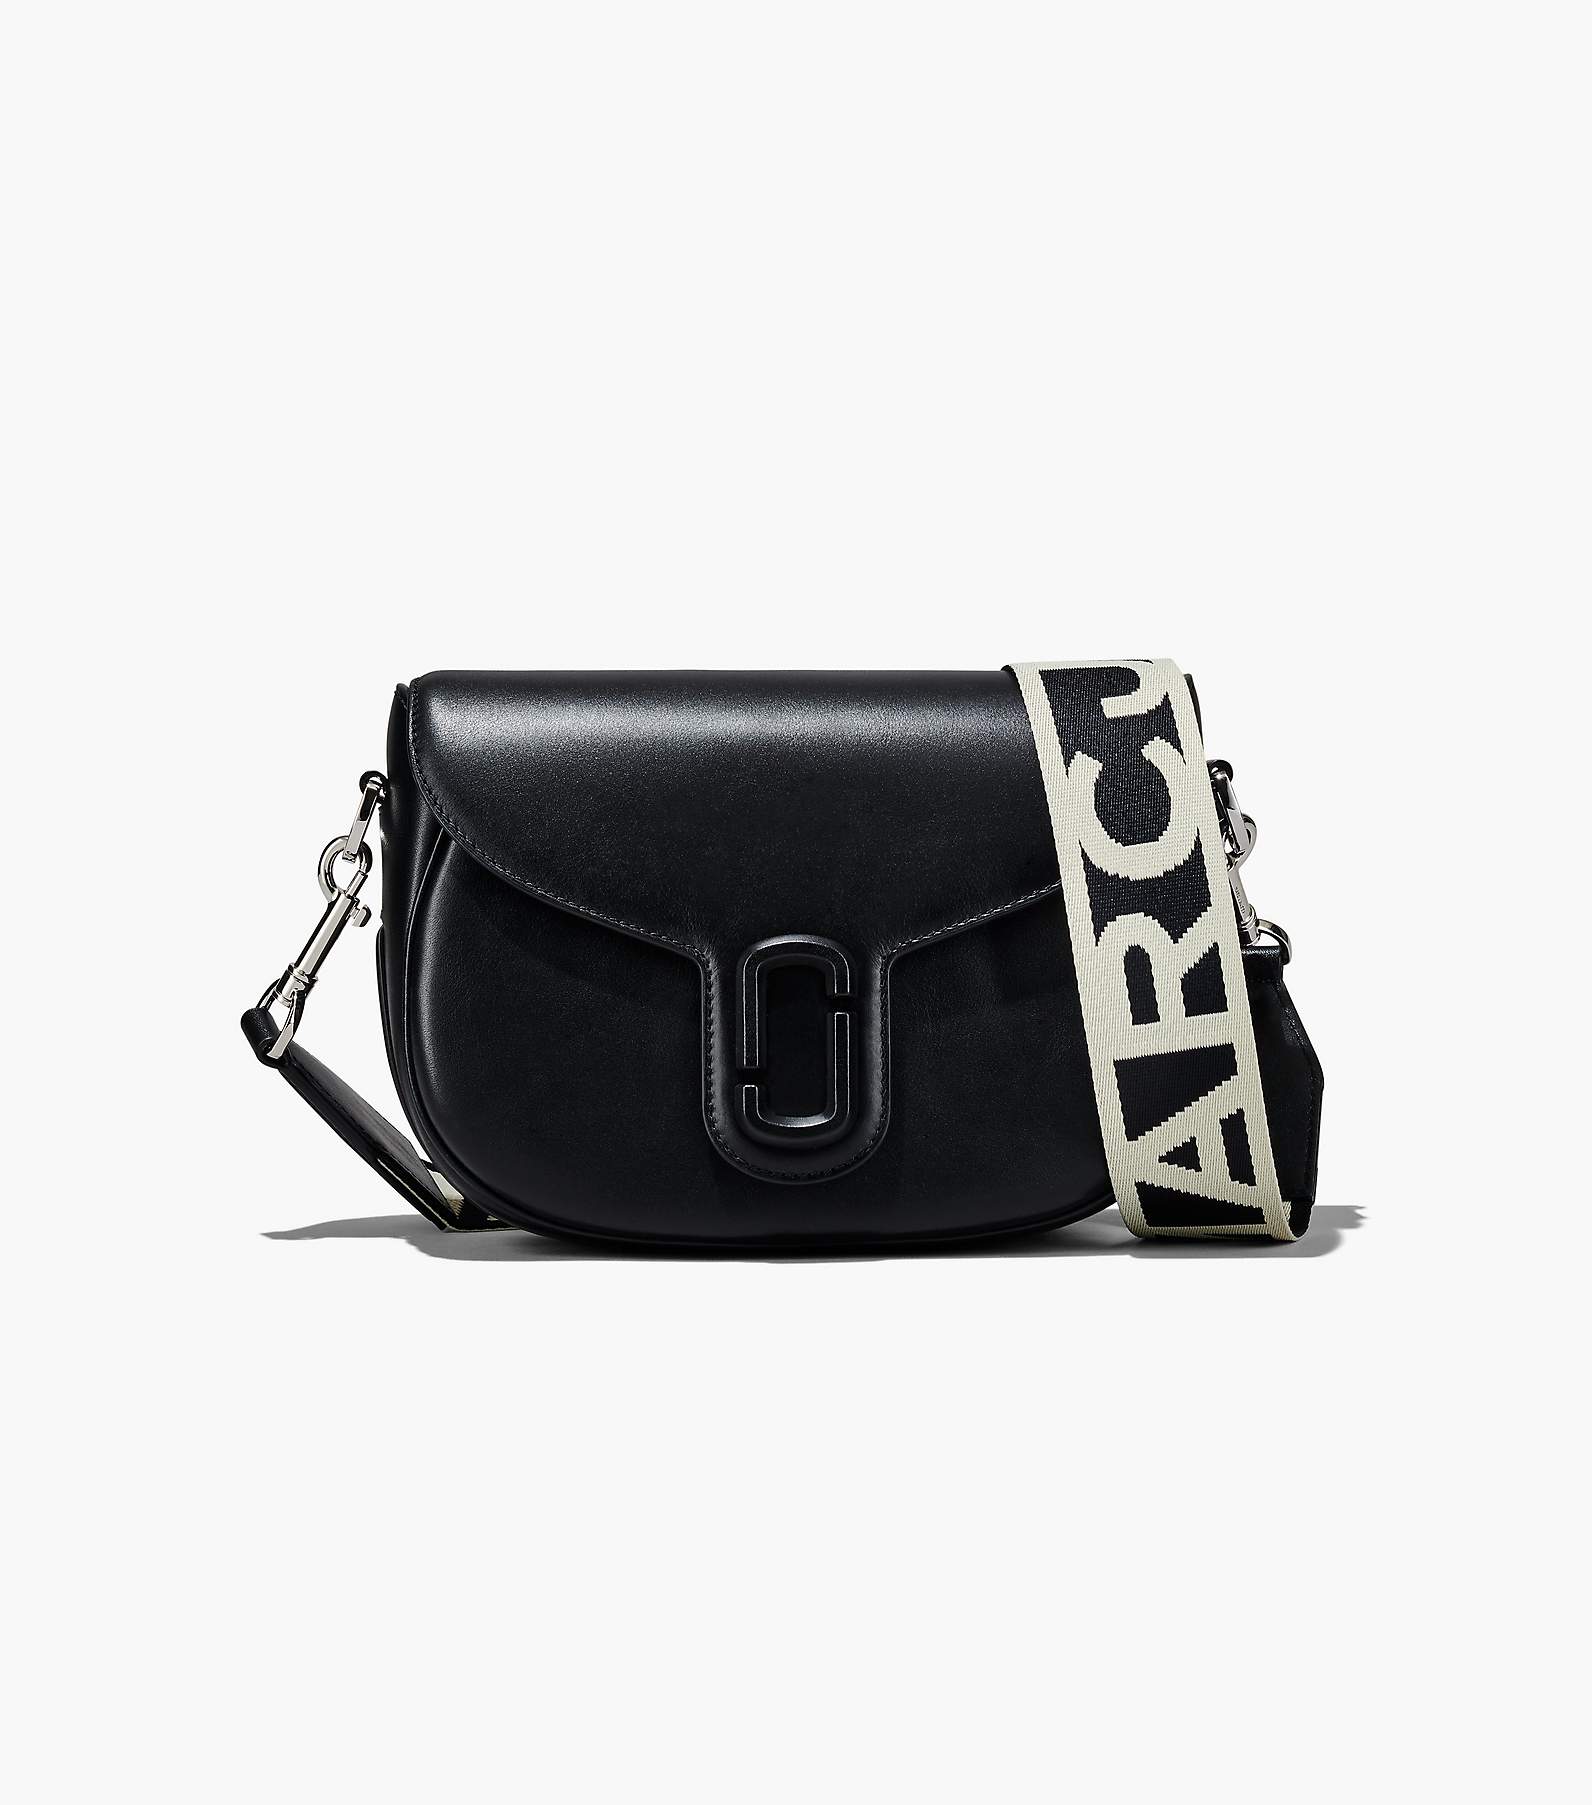 Buy Marc Jacobs All Black Camera Sling Bag (With Box) - Online